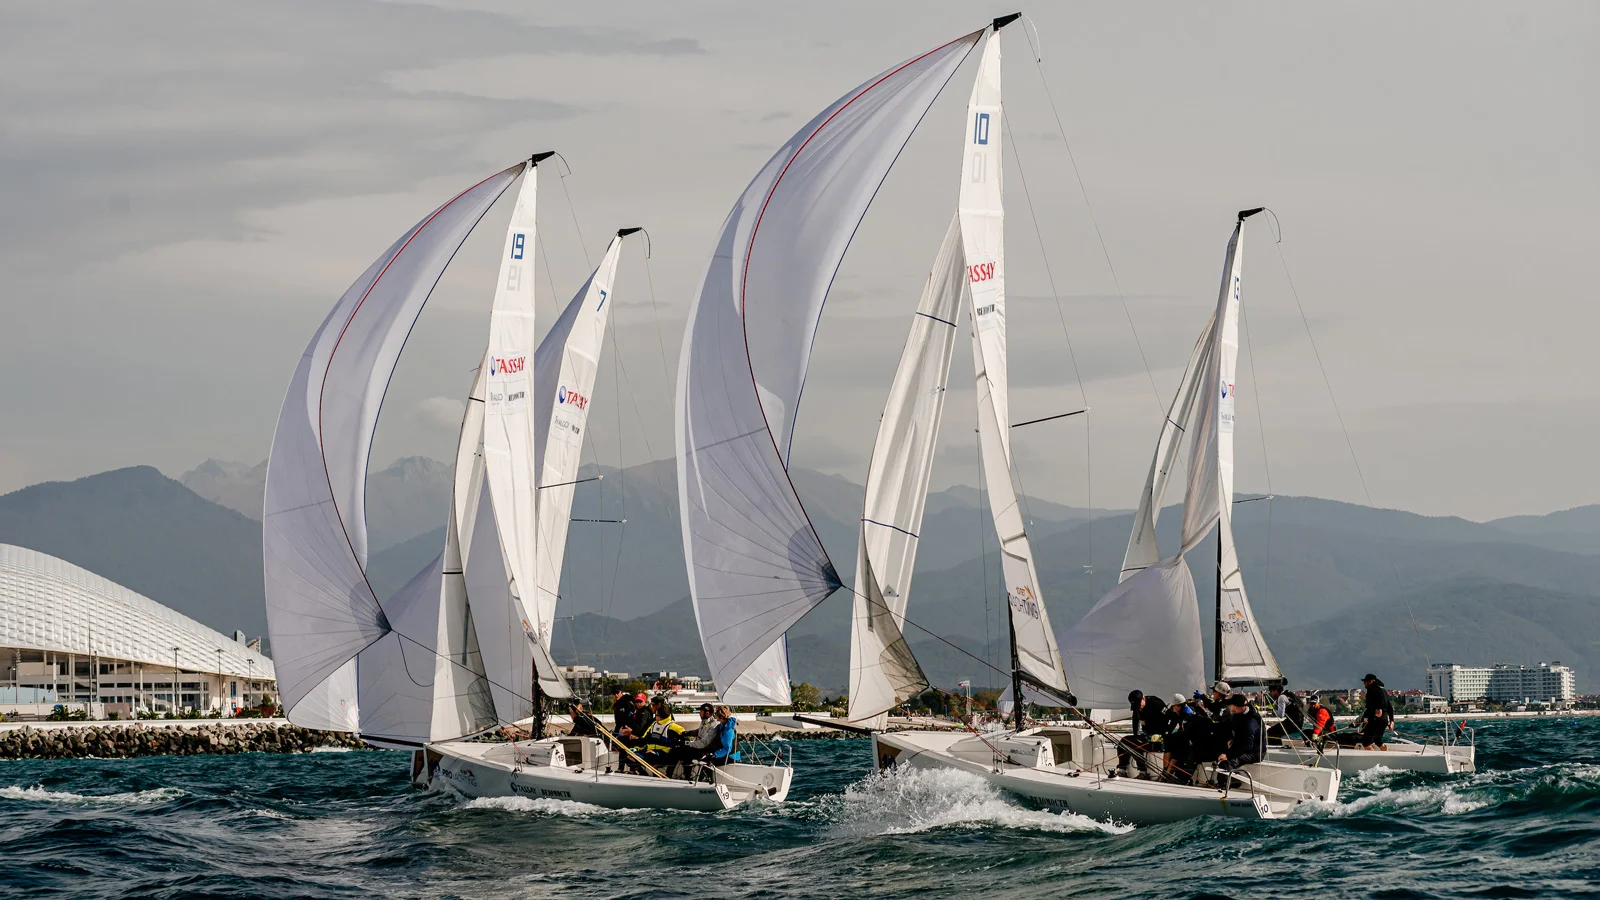 The final stage of PROyachting Cup will take place in Sochi